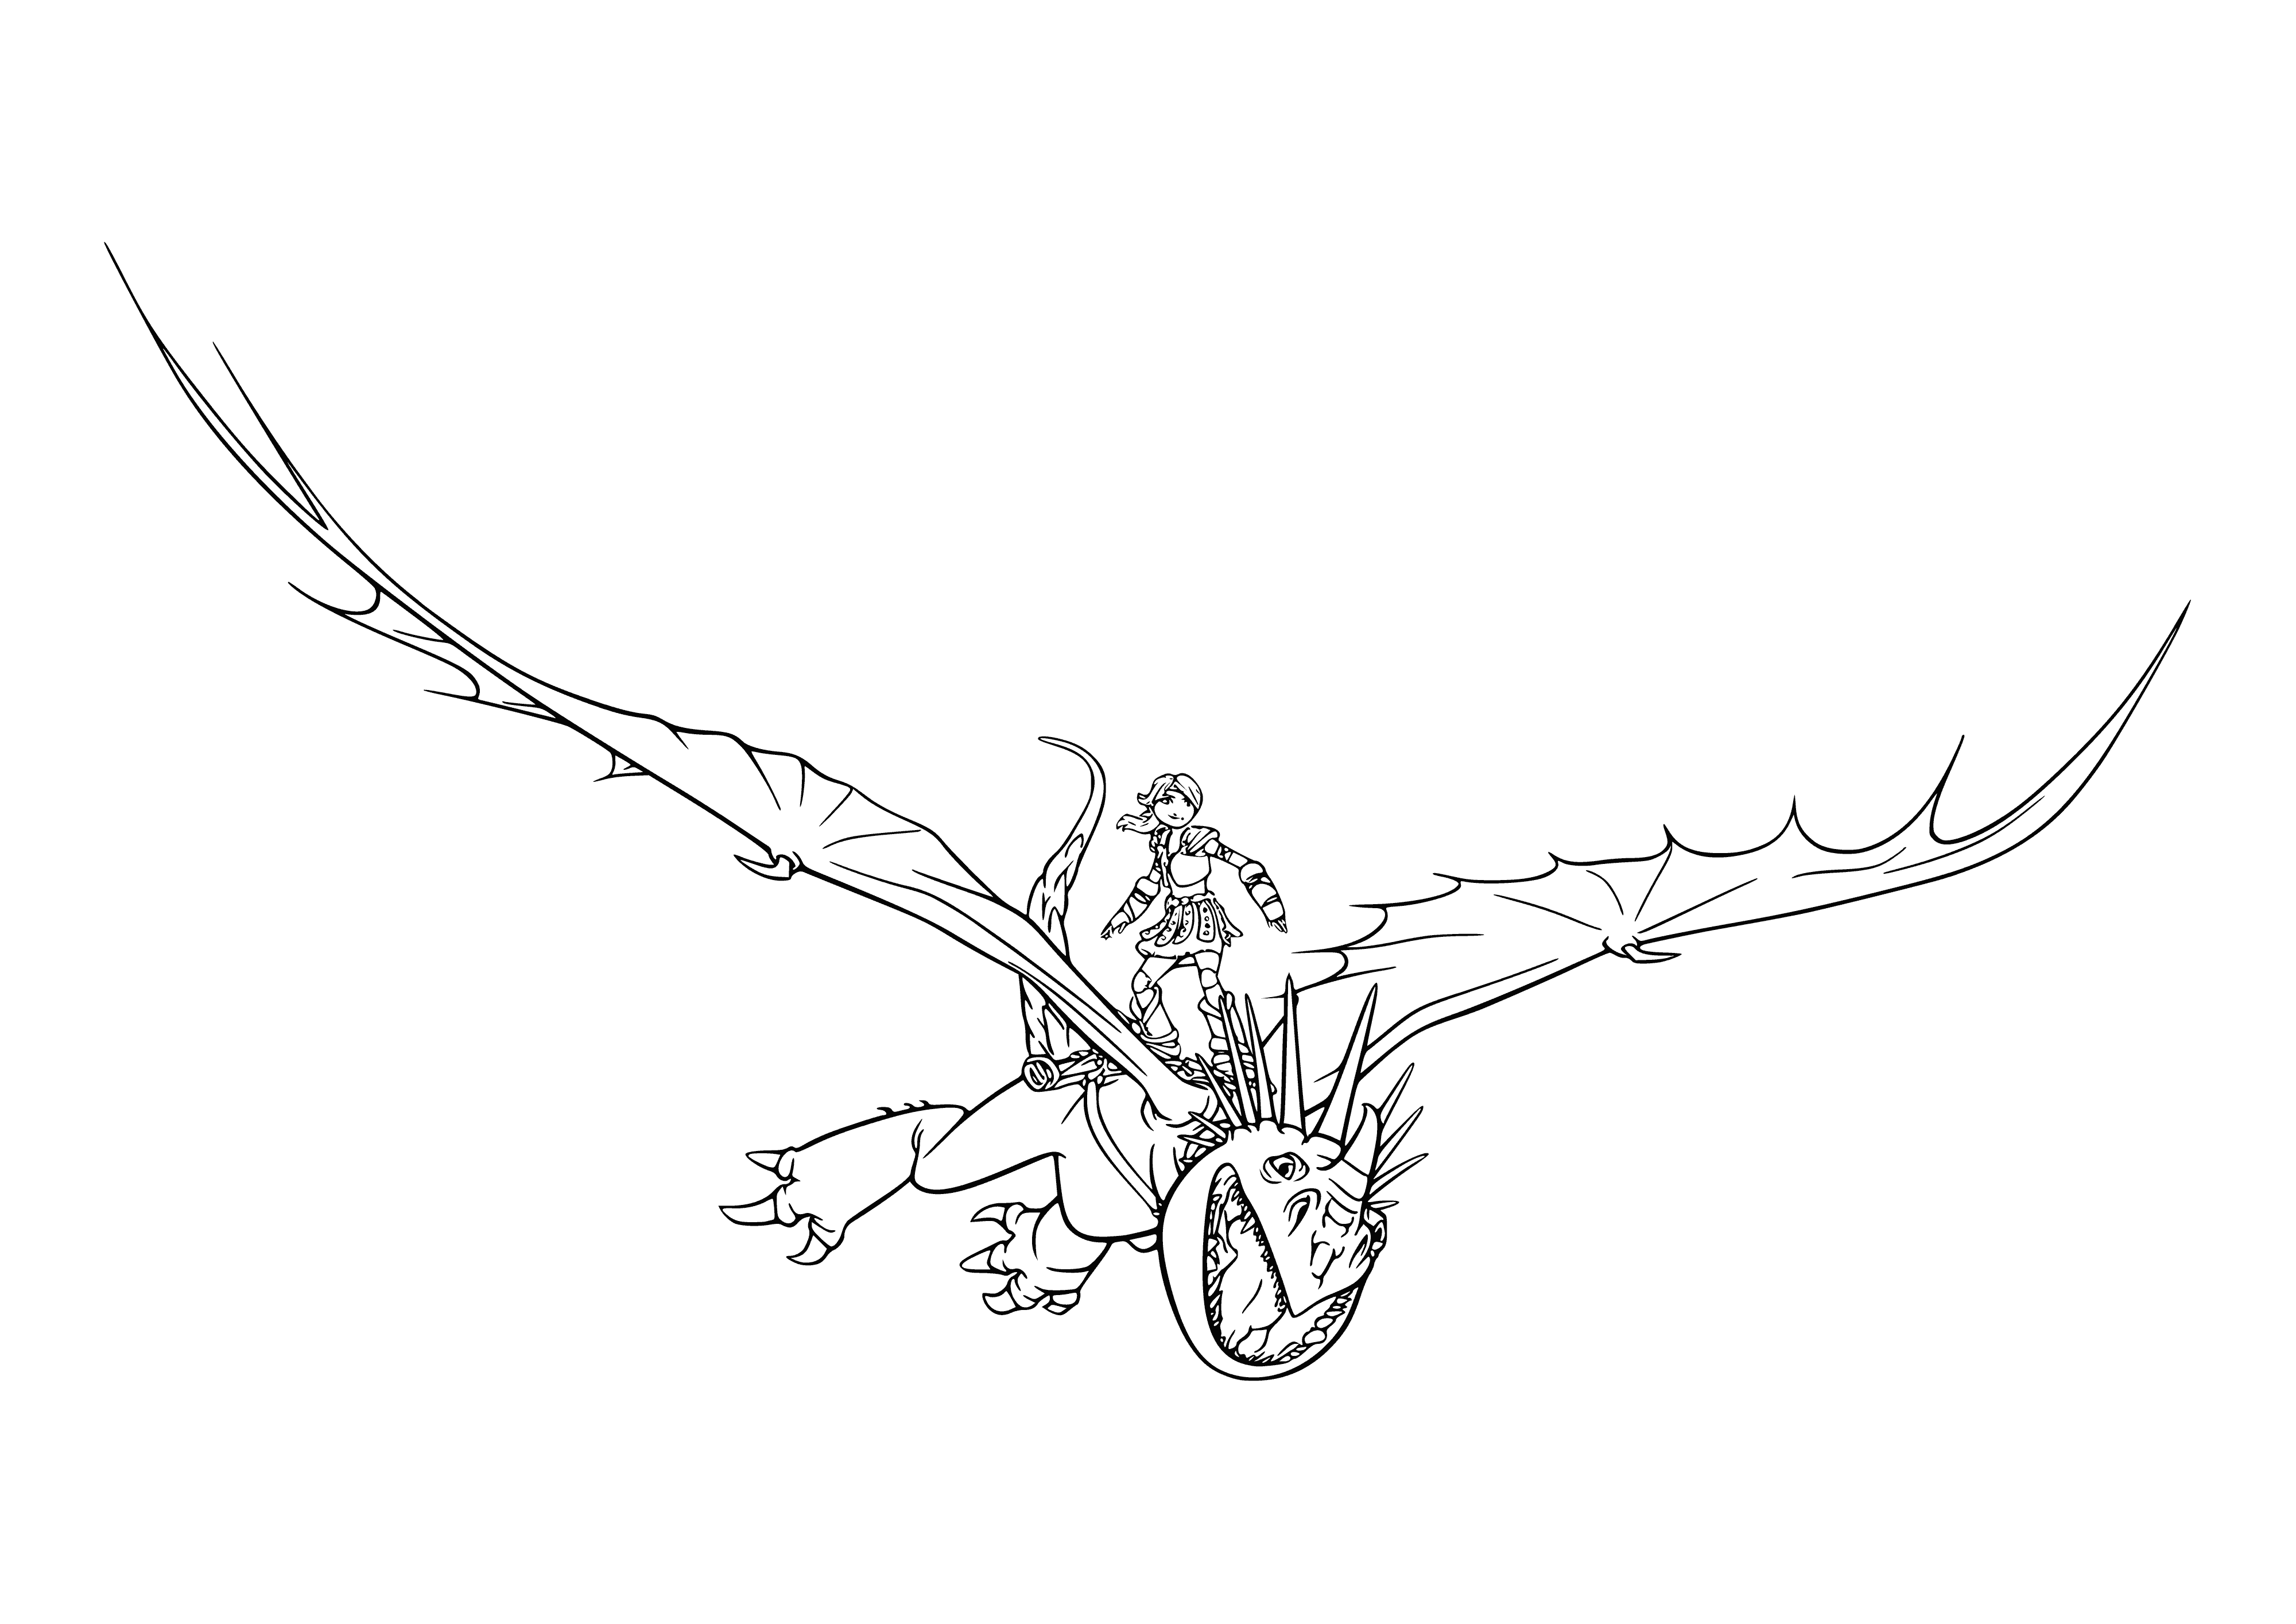 coloring page: Astrid flies on a dragon, Thunderguild, feeling the wind in her hair, looking happy and excited.